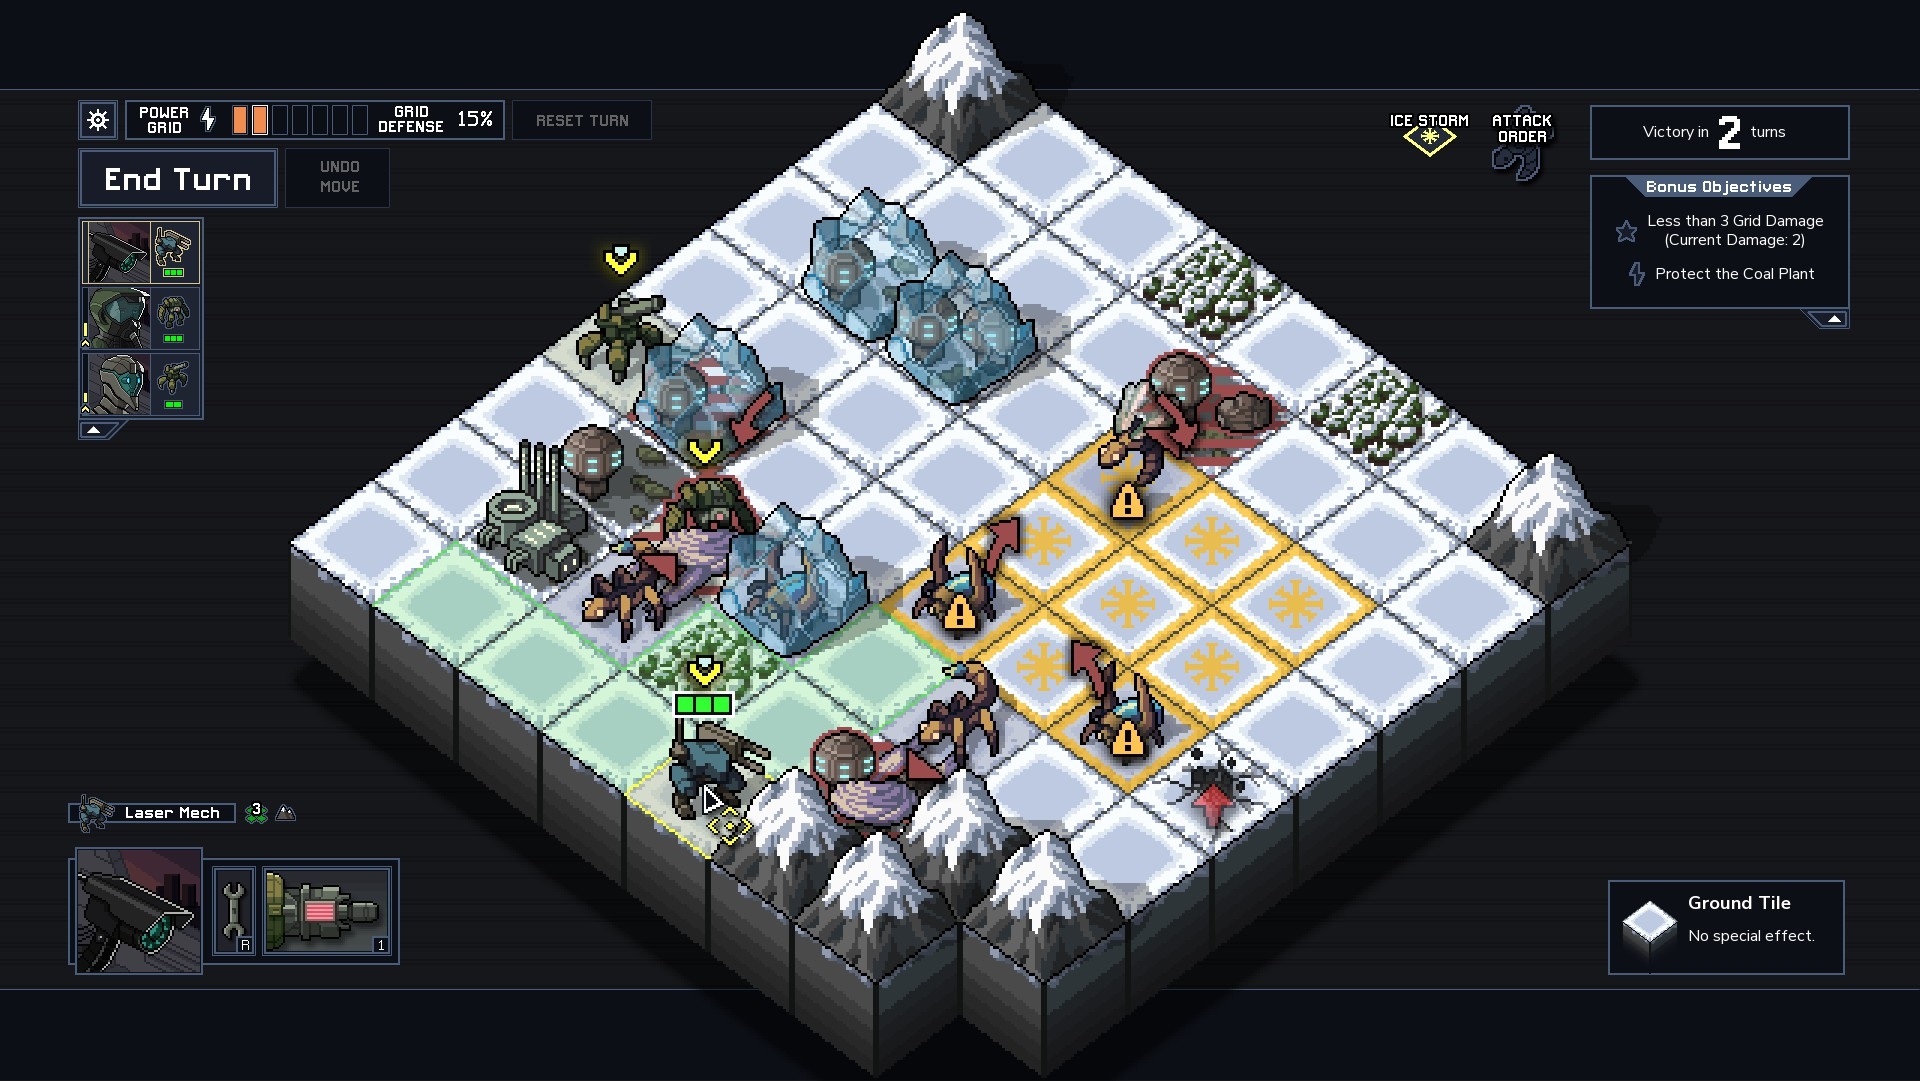 download into the breach metacritic